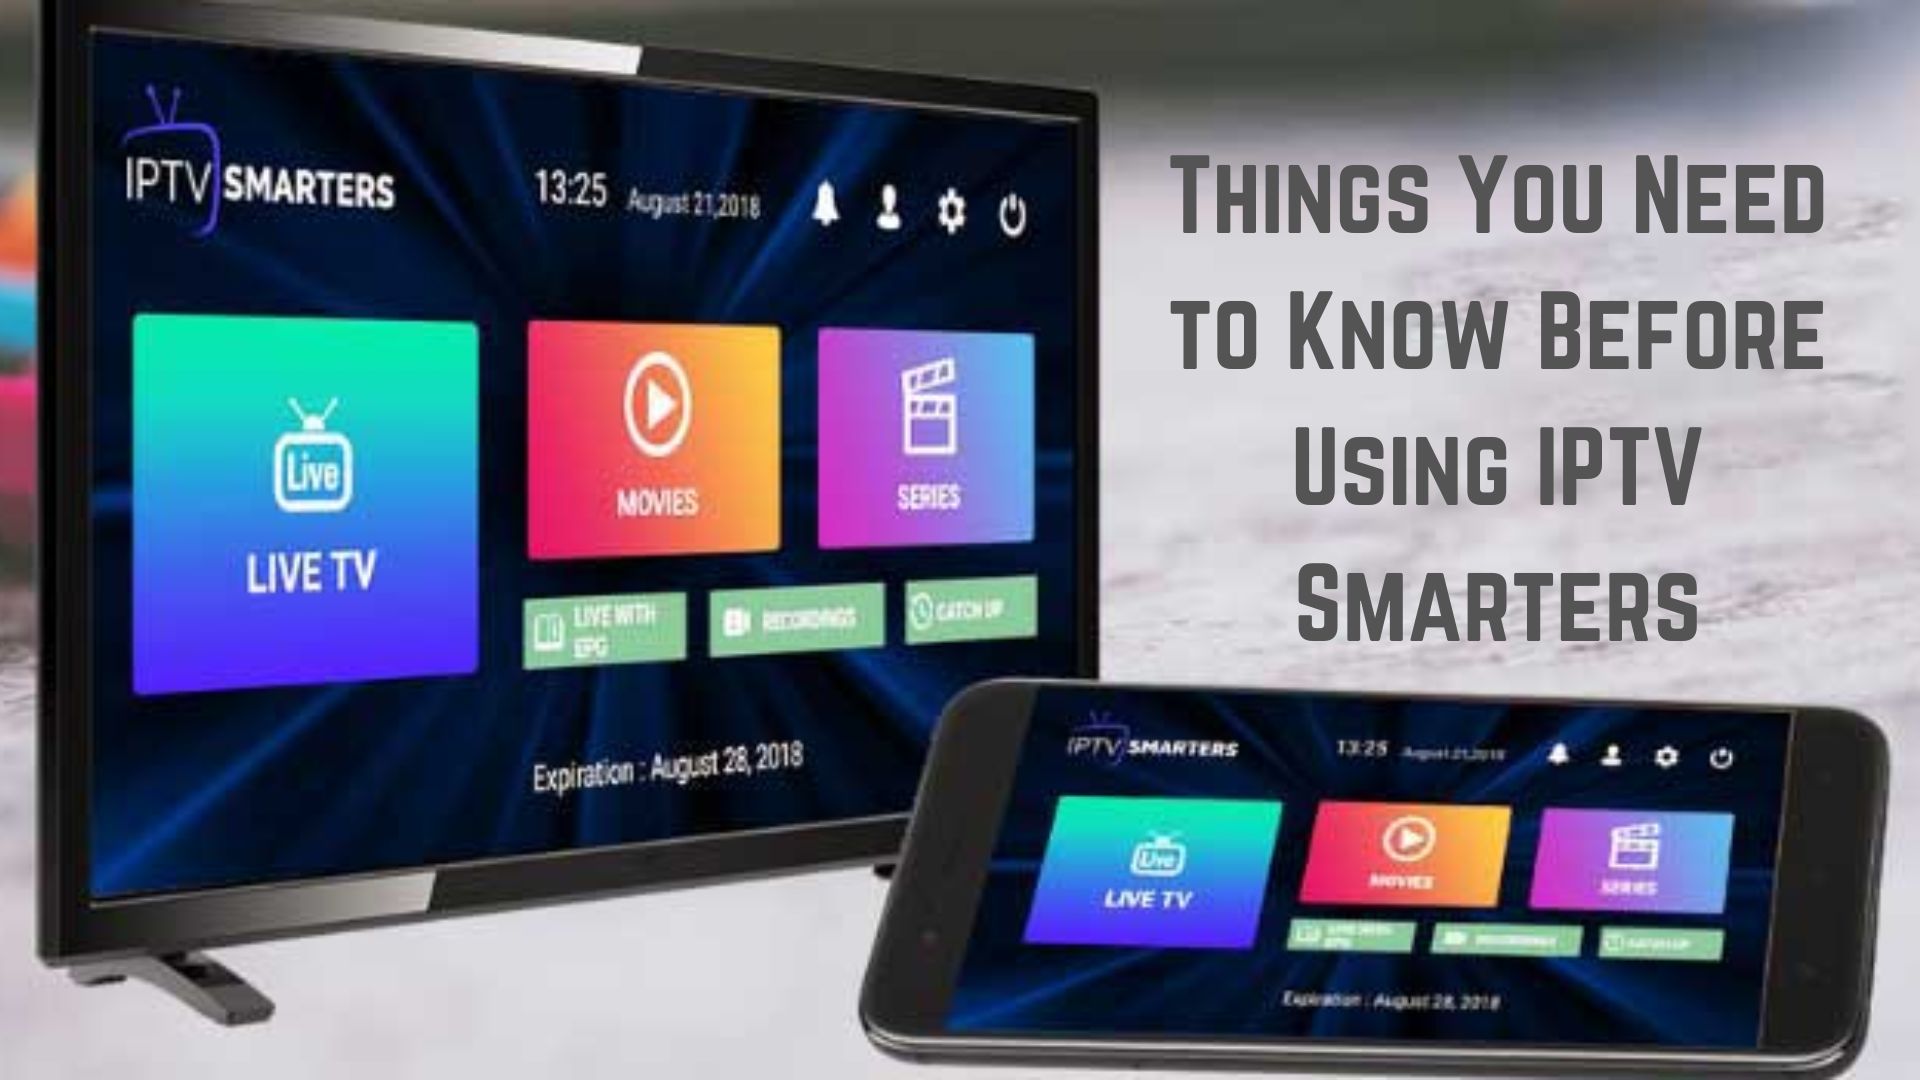 Things You Need to Know Before Using IPTV Smarters-3eb3c296